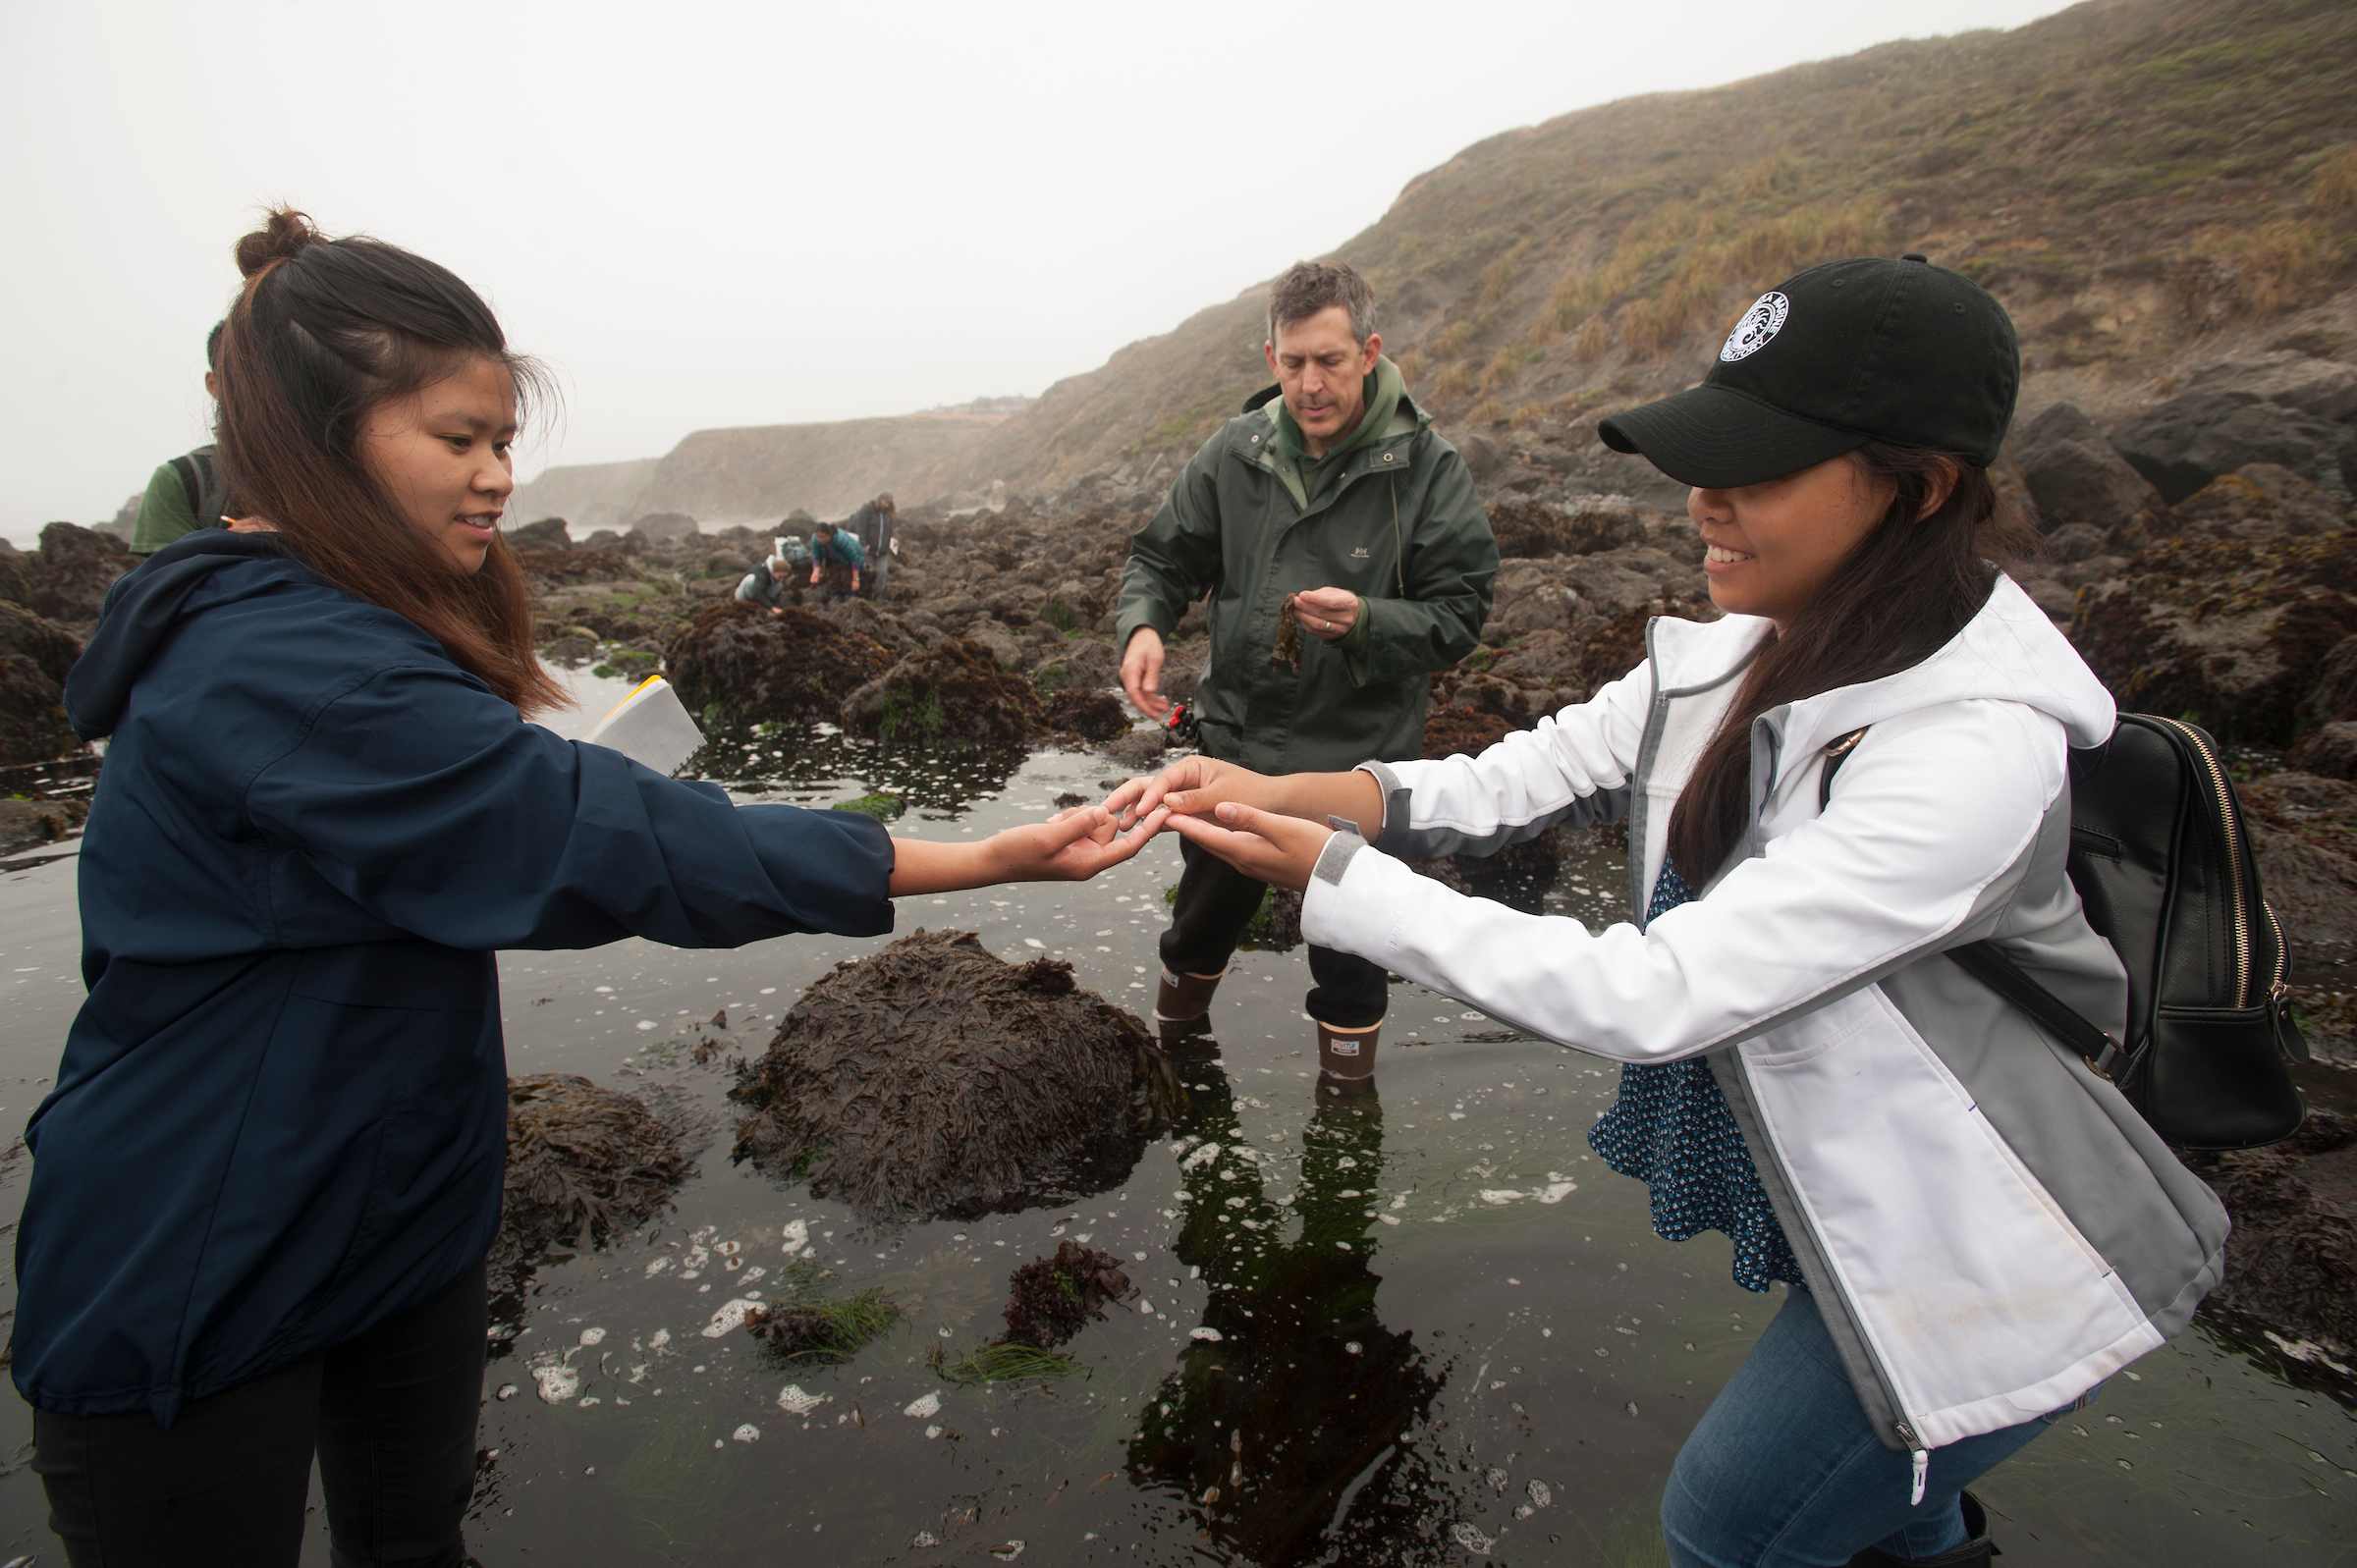 Two students exchange finds by holding out their hands. They stand in the water. Photo taken by Gregory Urquiaga. 